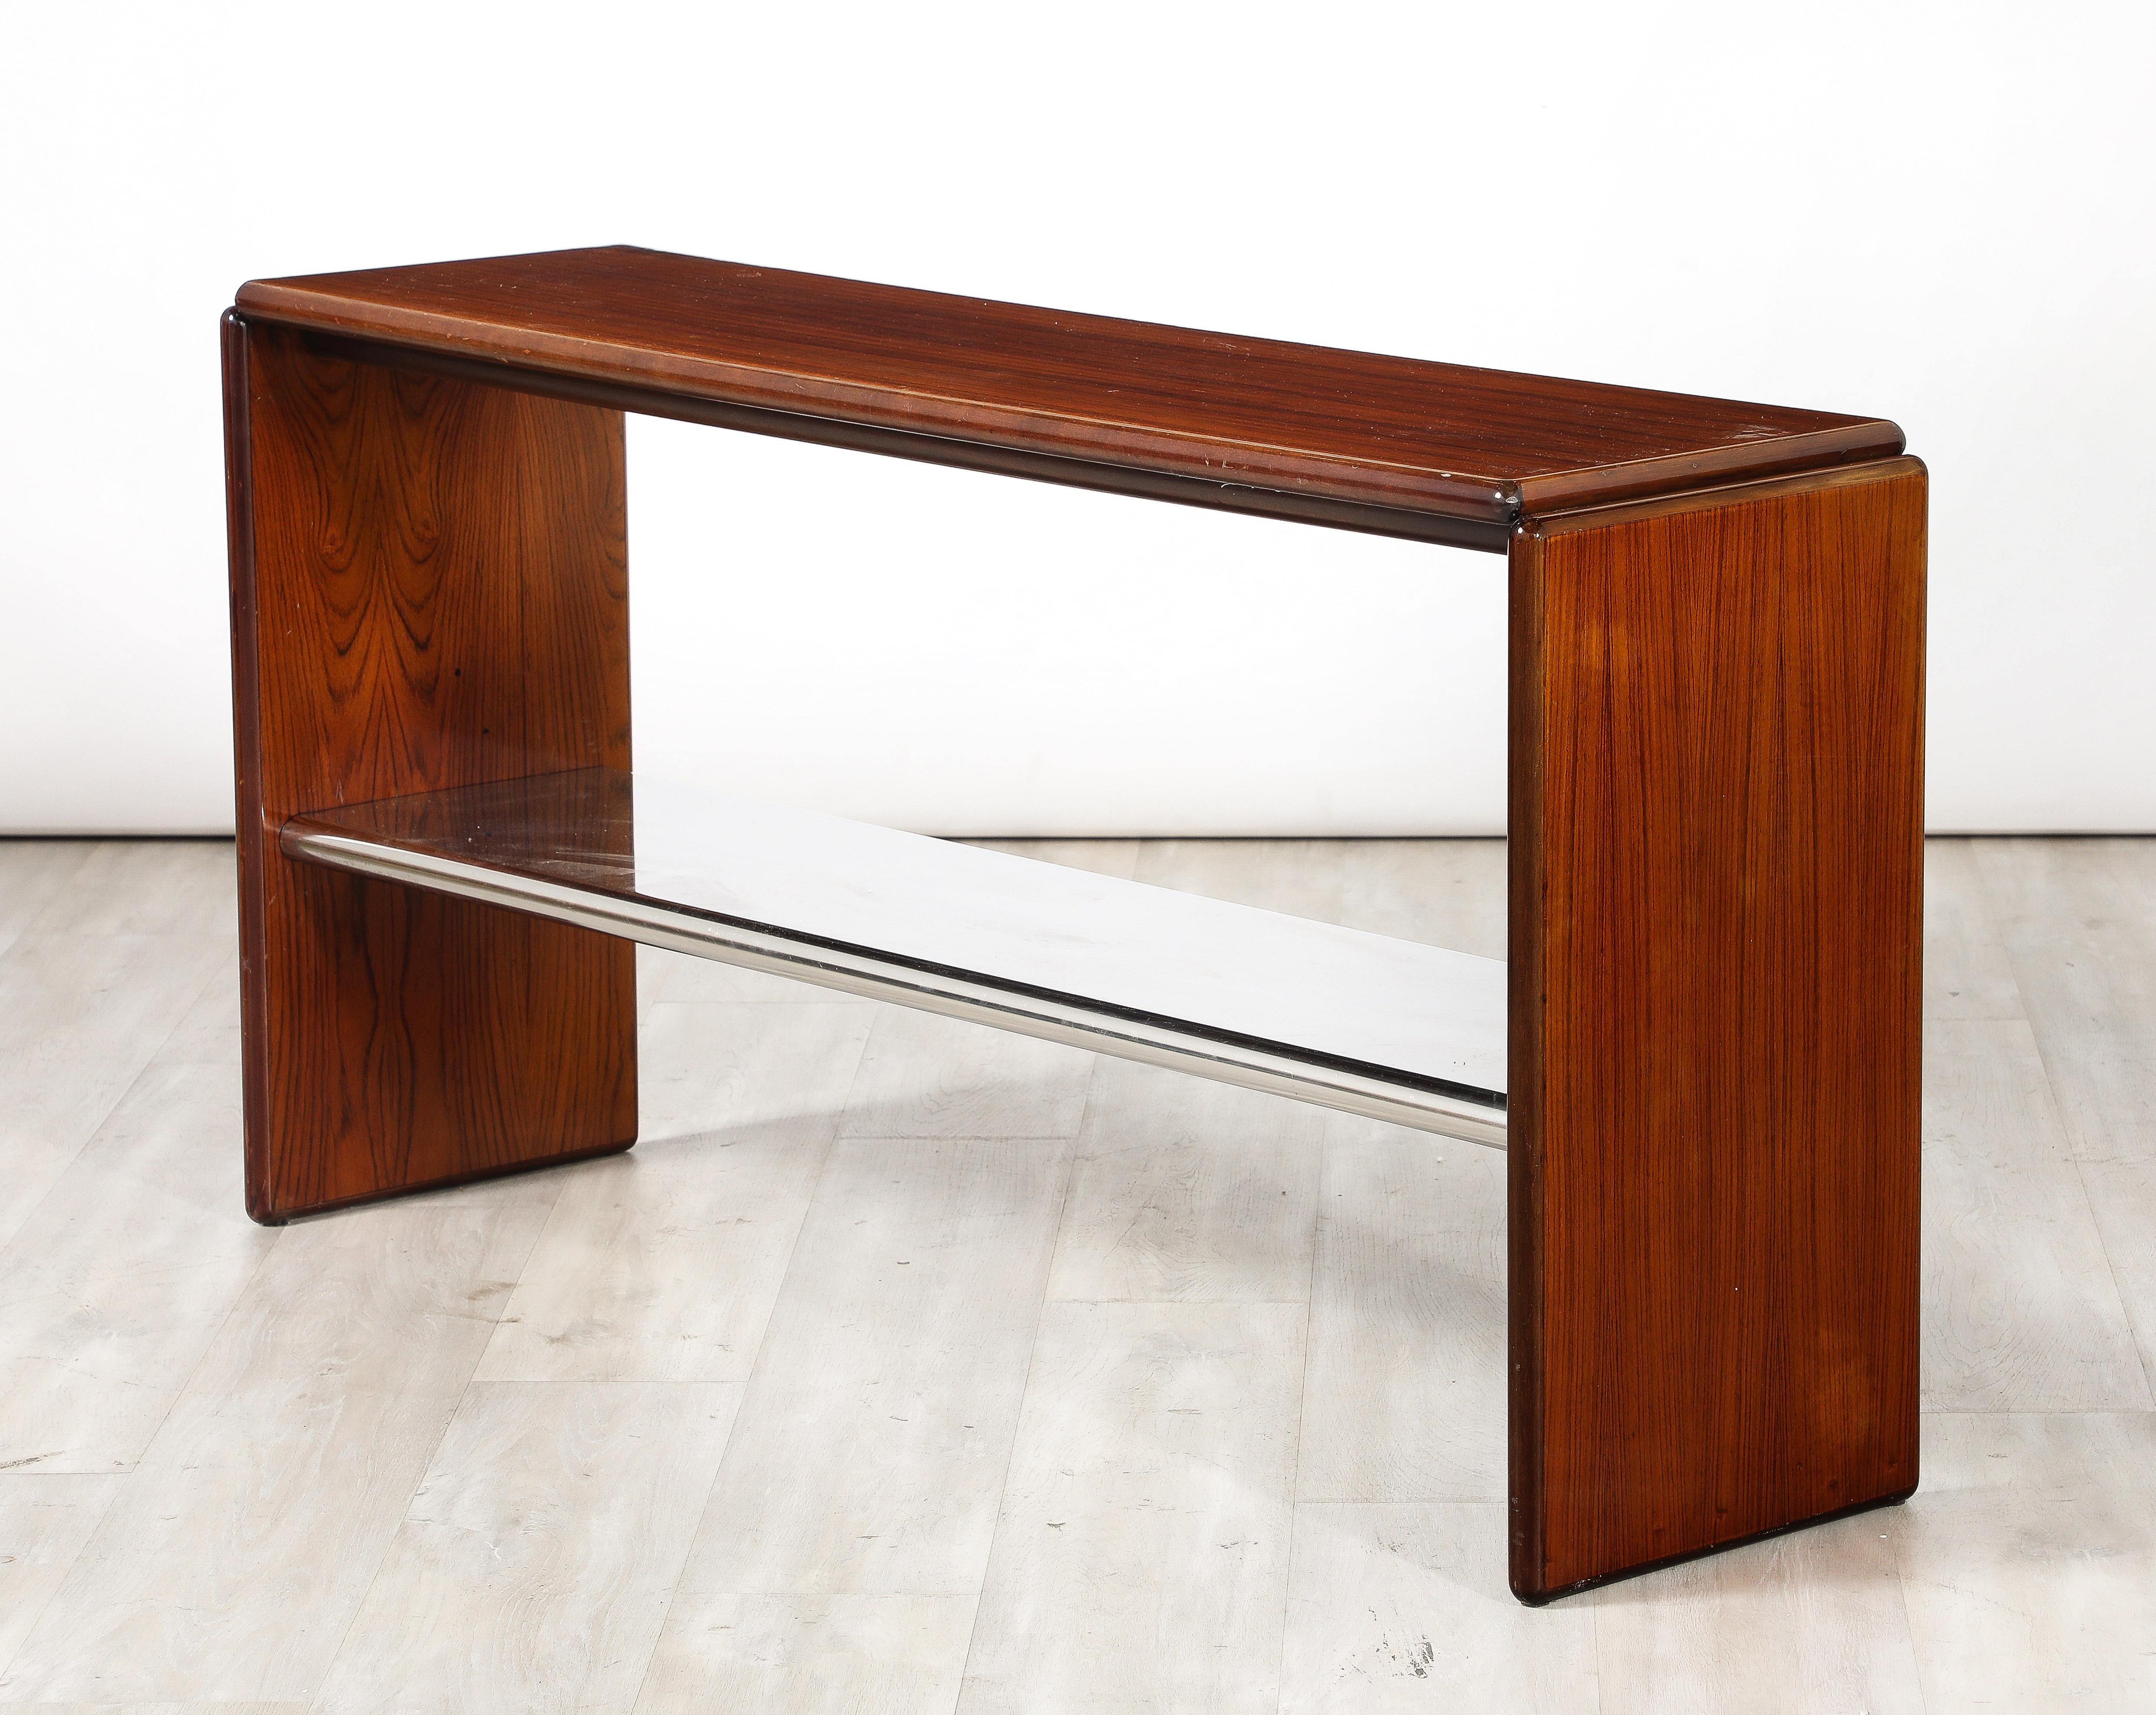 Italian Modernist Wood and Chrome Console Table, Italy, circa 1960 For Sale 2